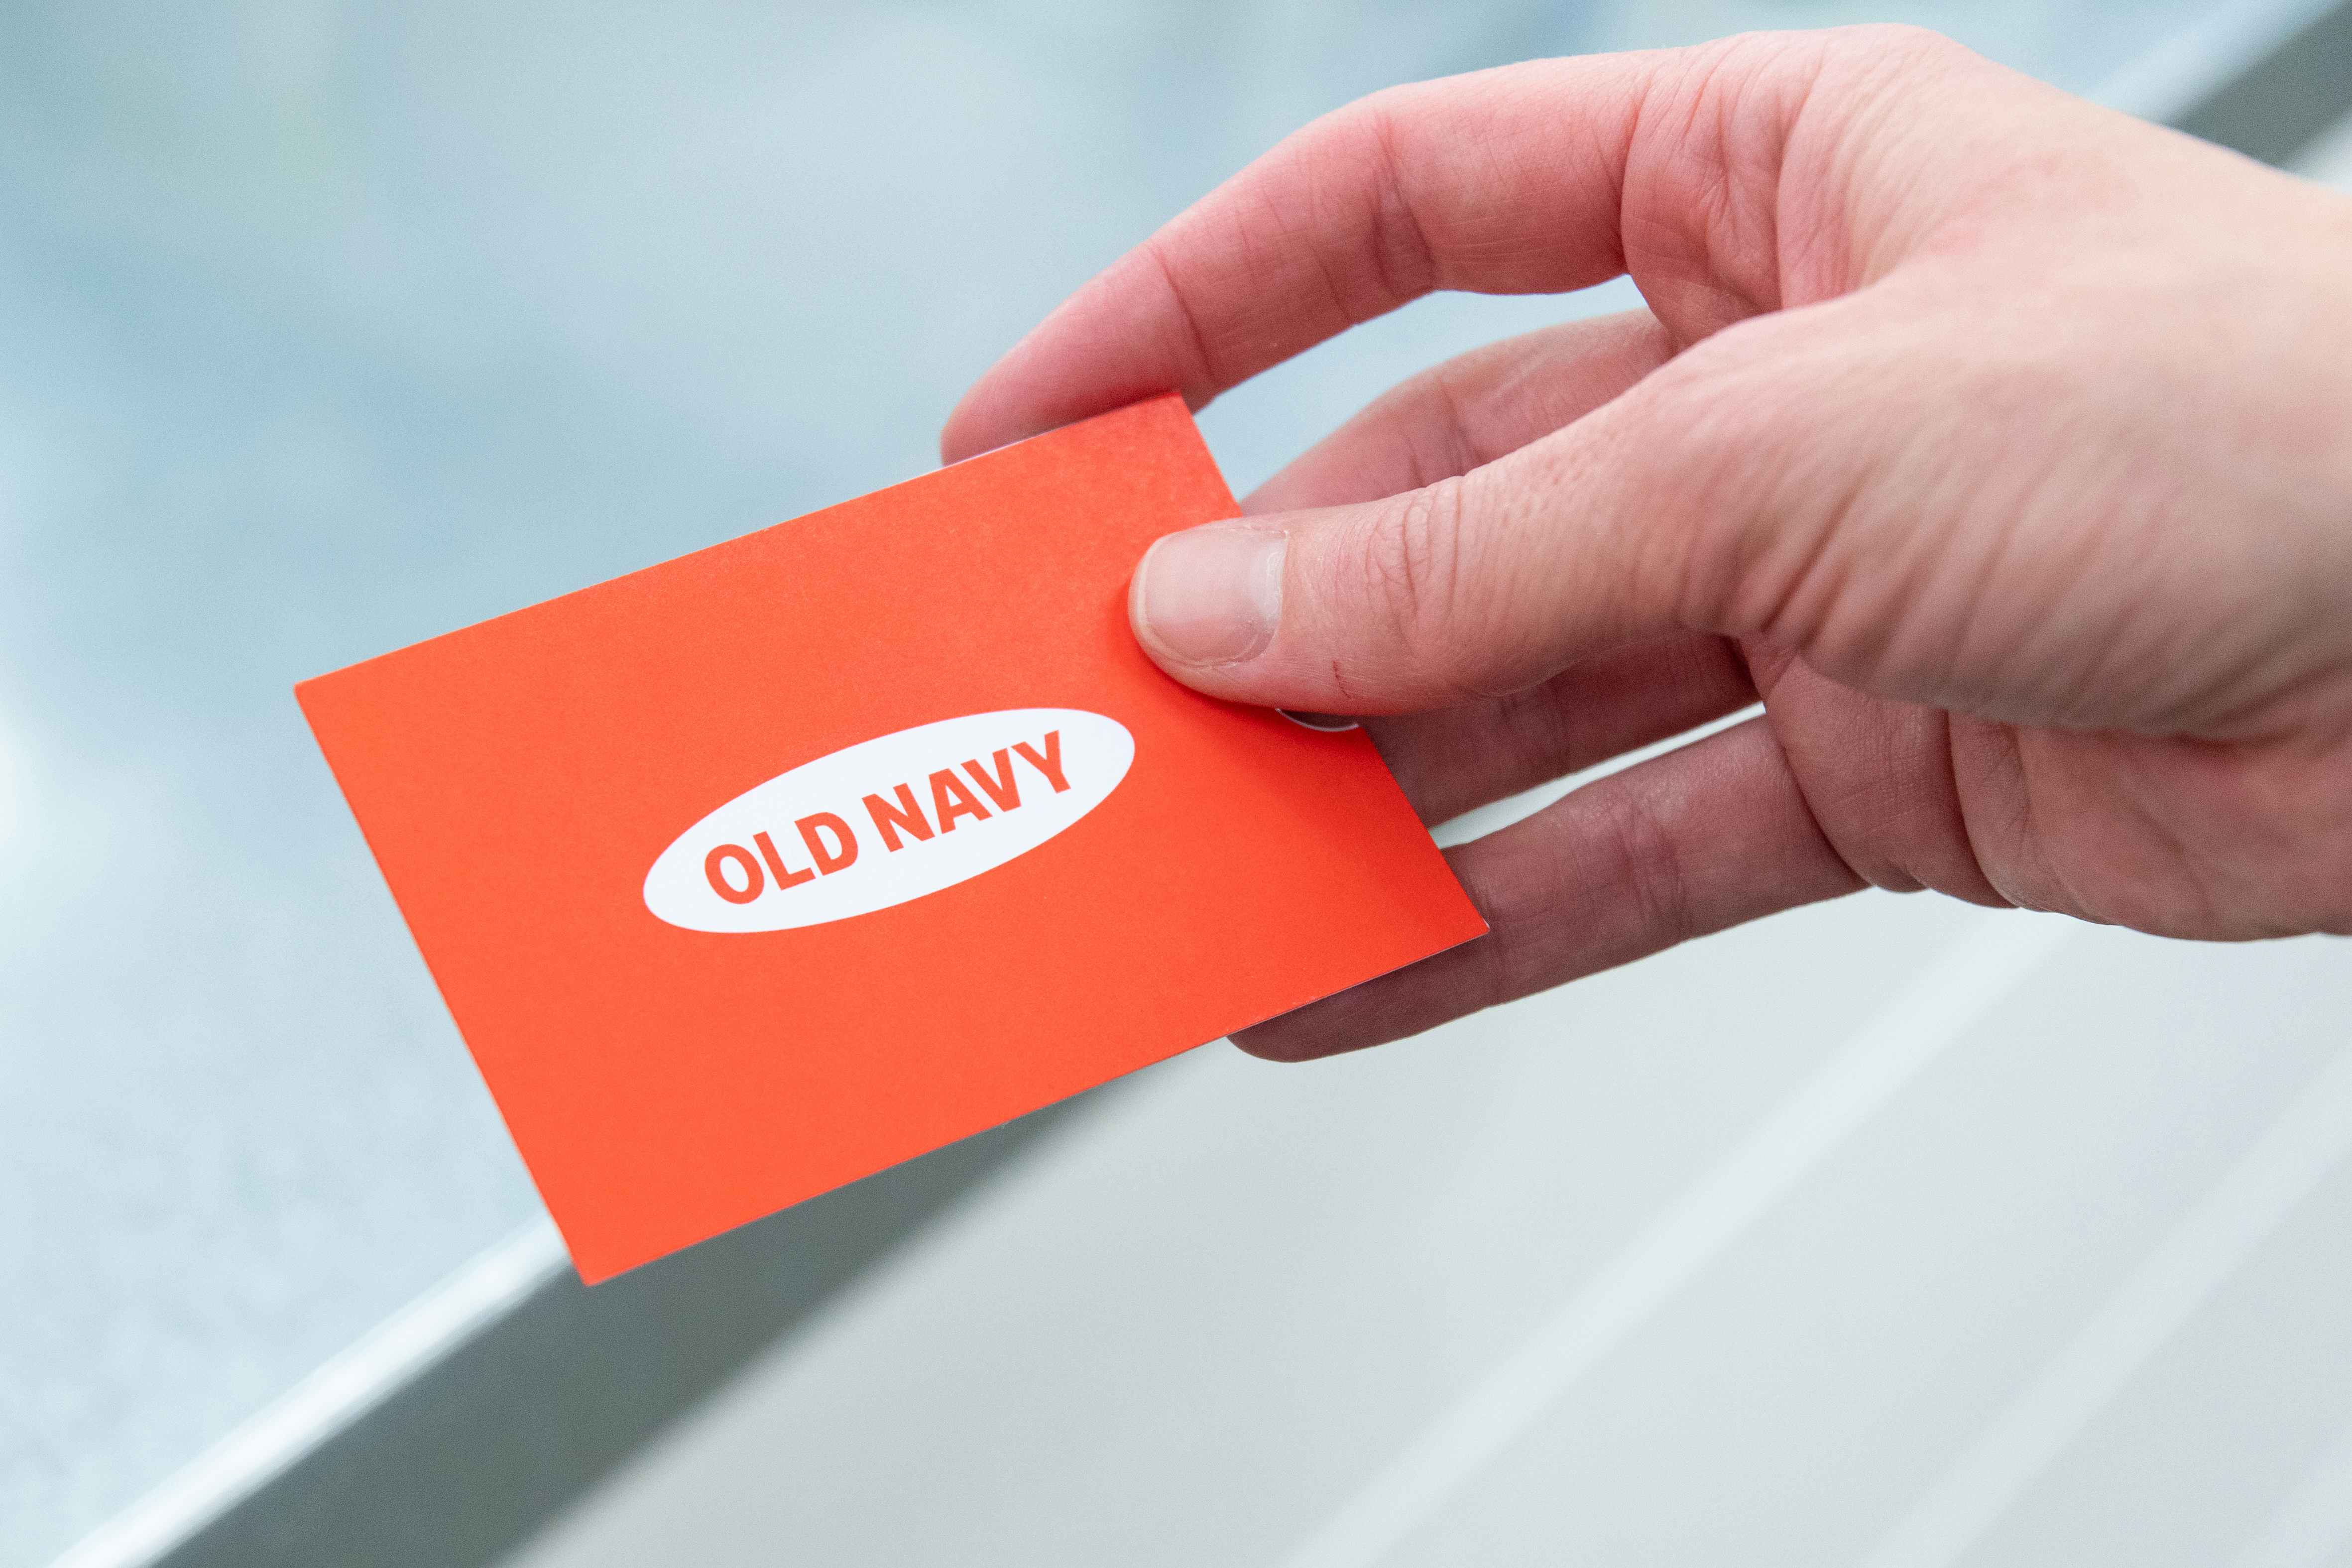 A close up on someone's hand holding an Old Navy gift card